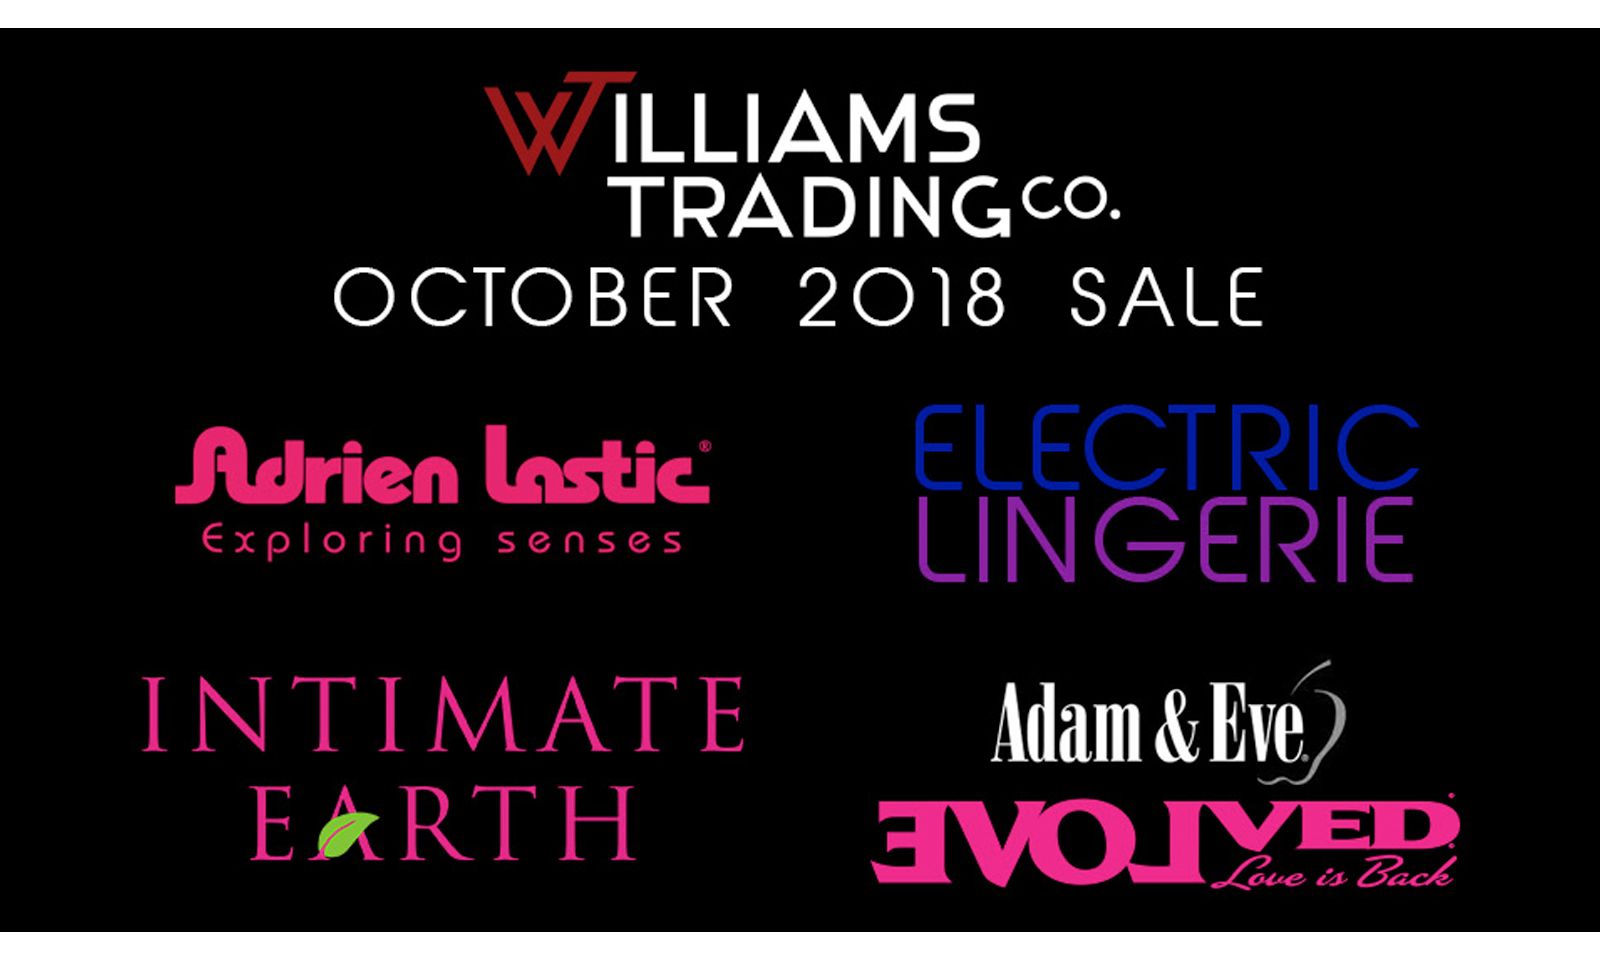 Williams Trading Holding Month-Long Sale in October